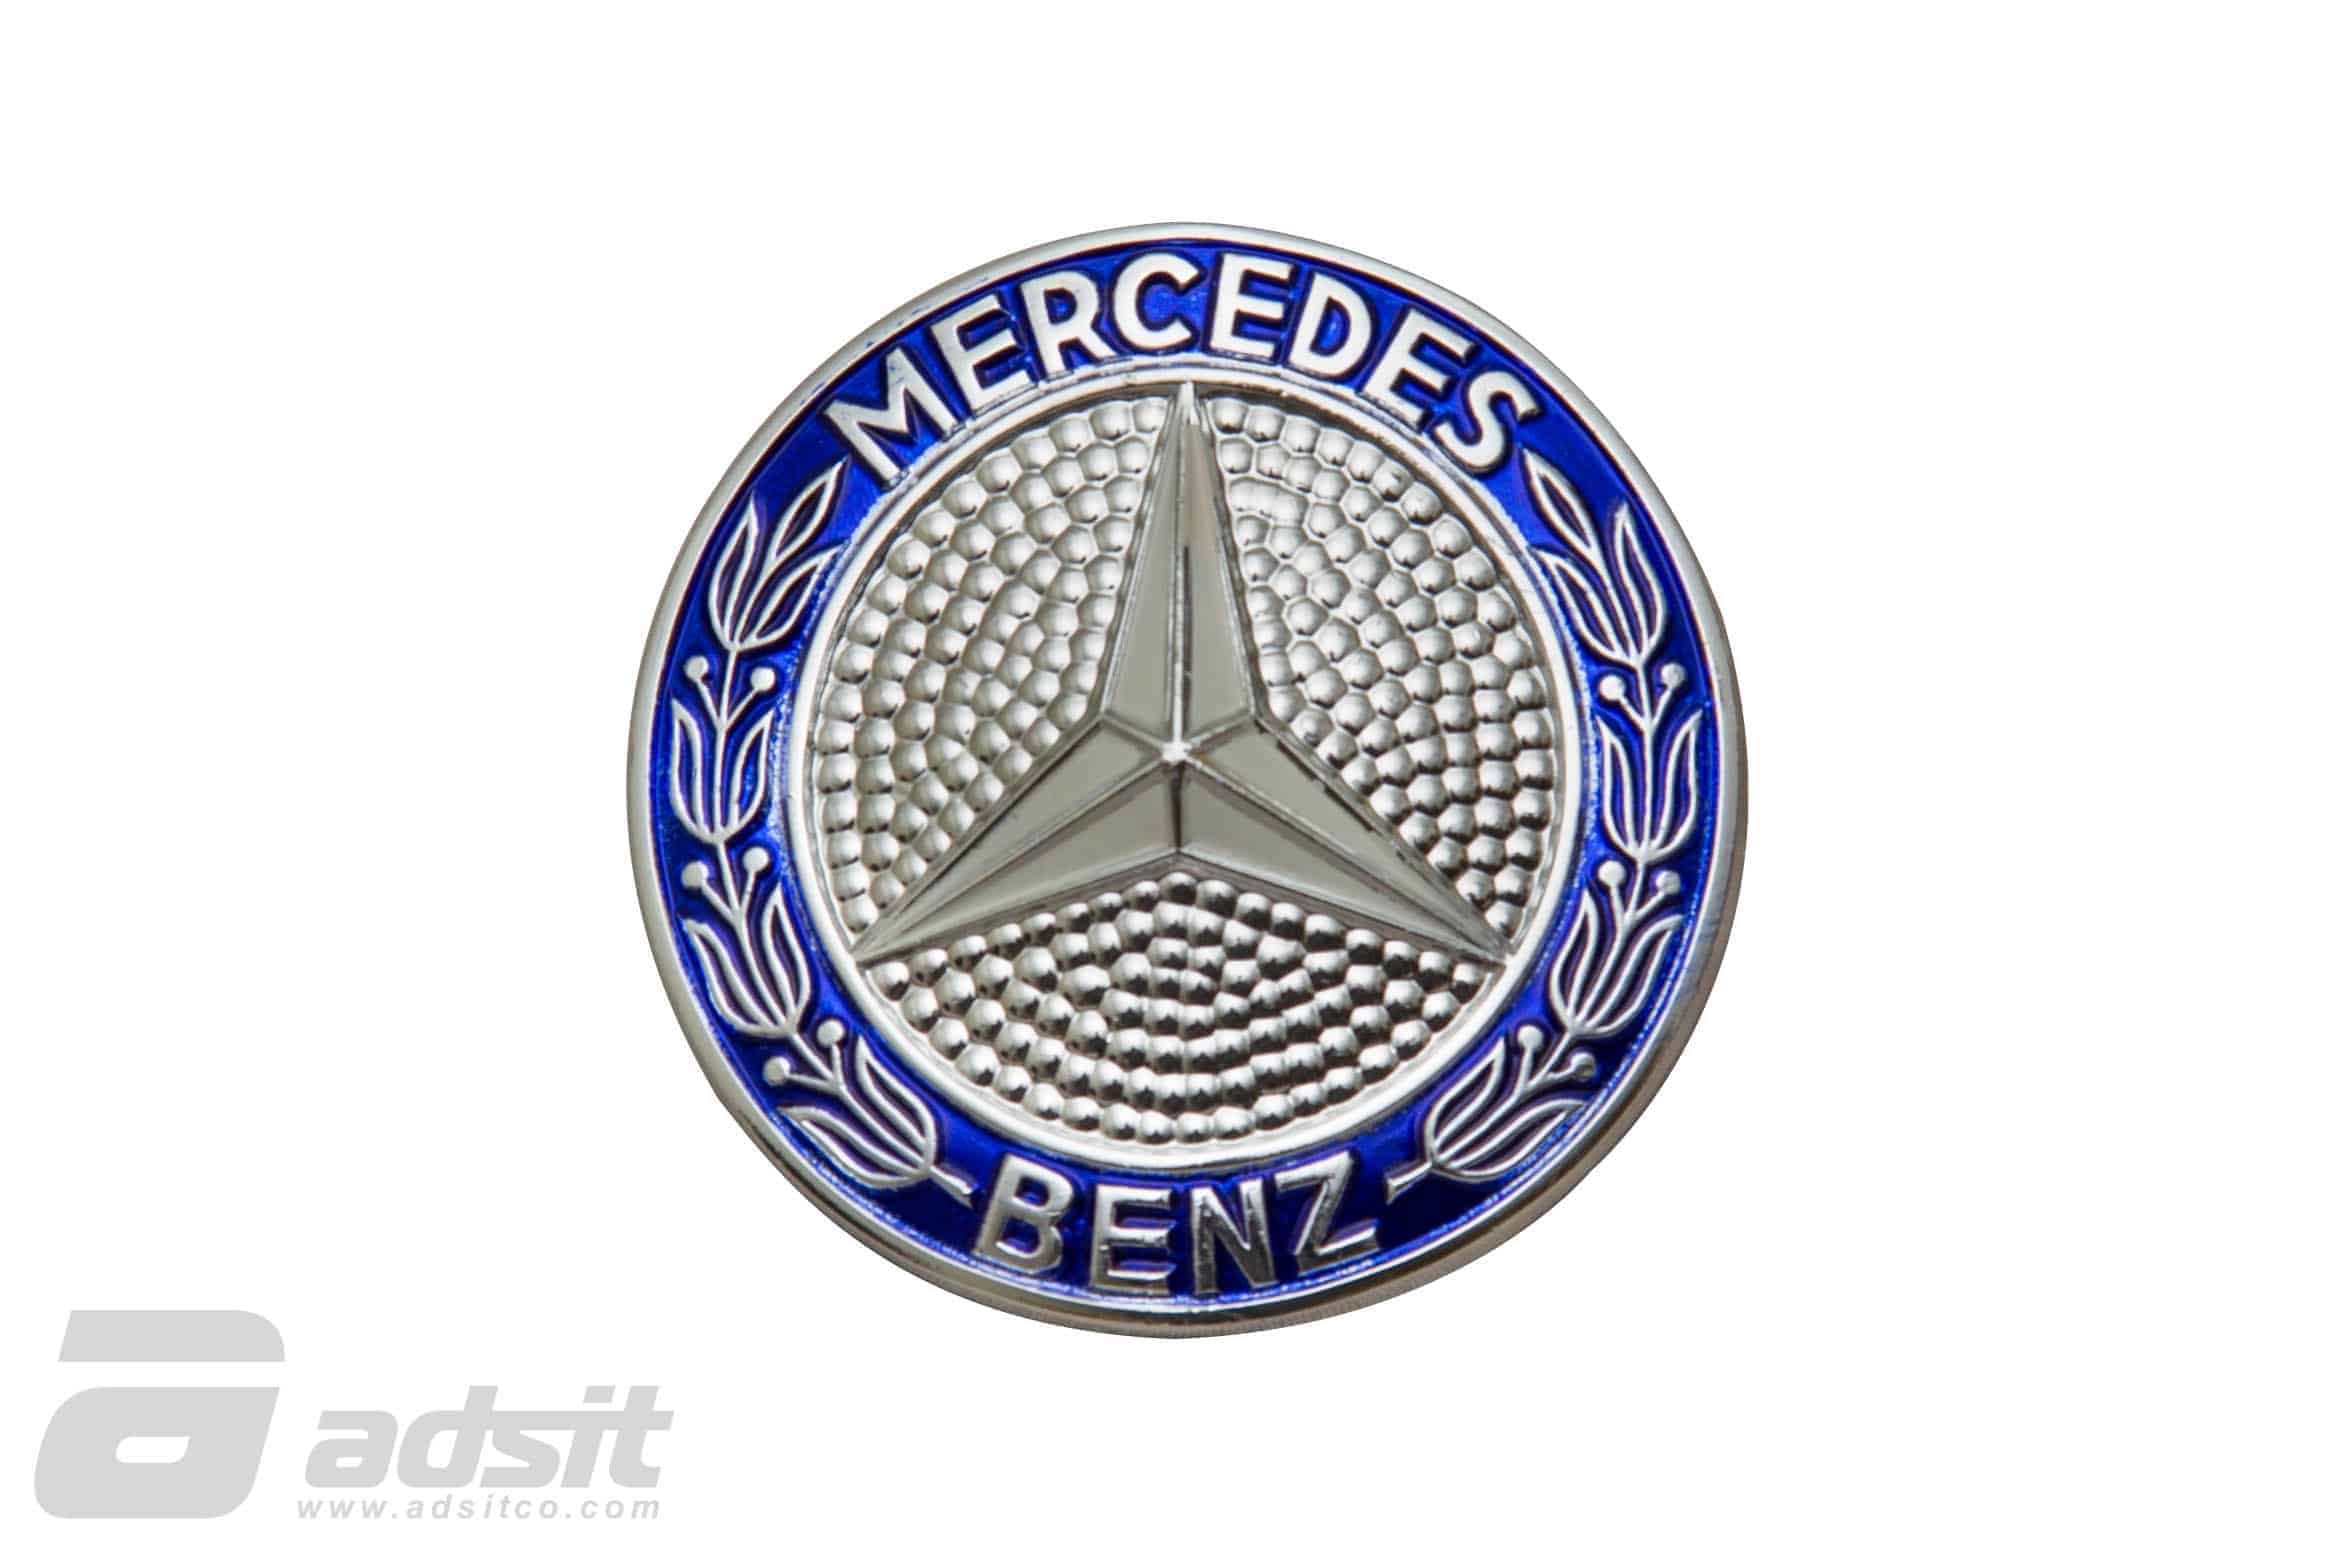 GRILLE BADGE